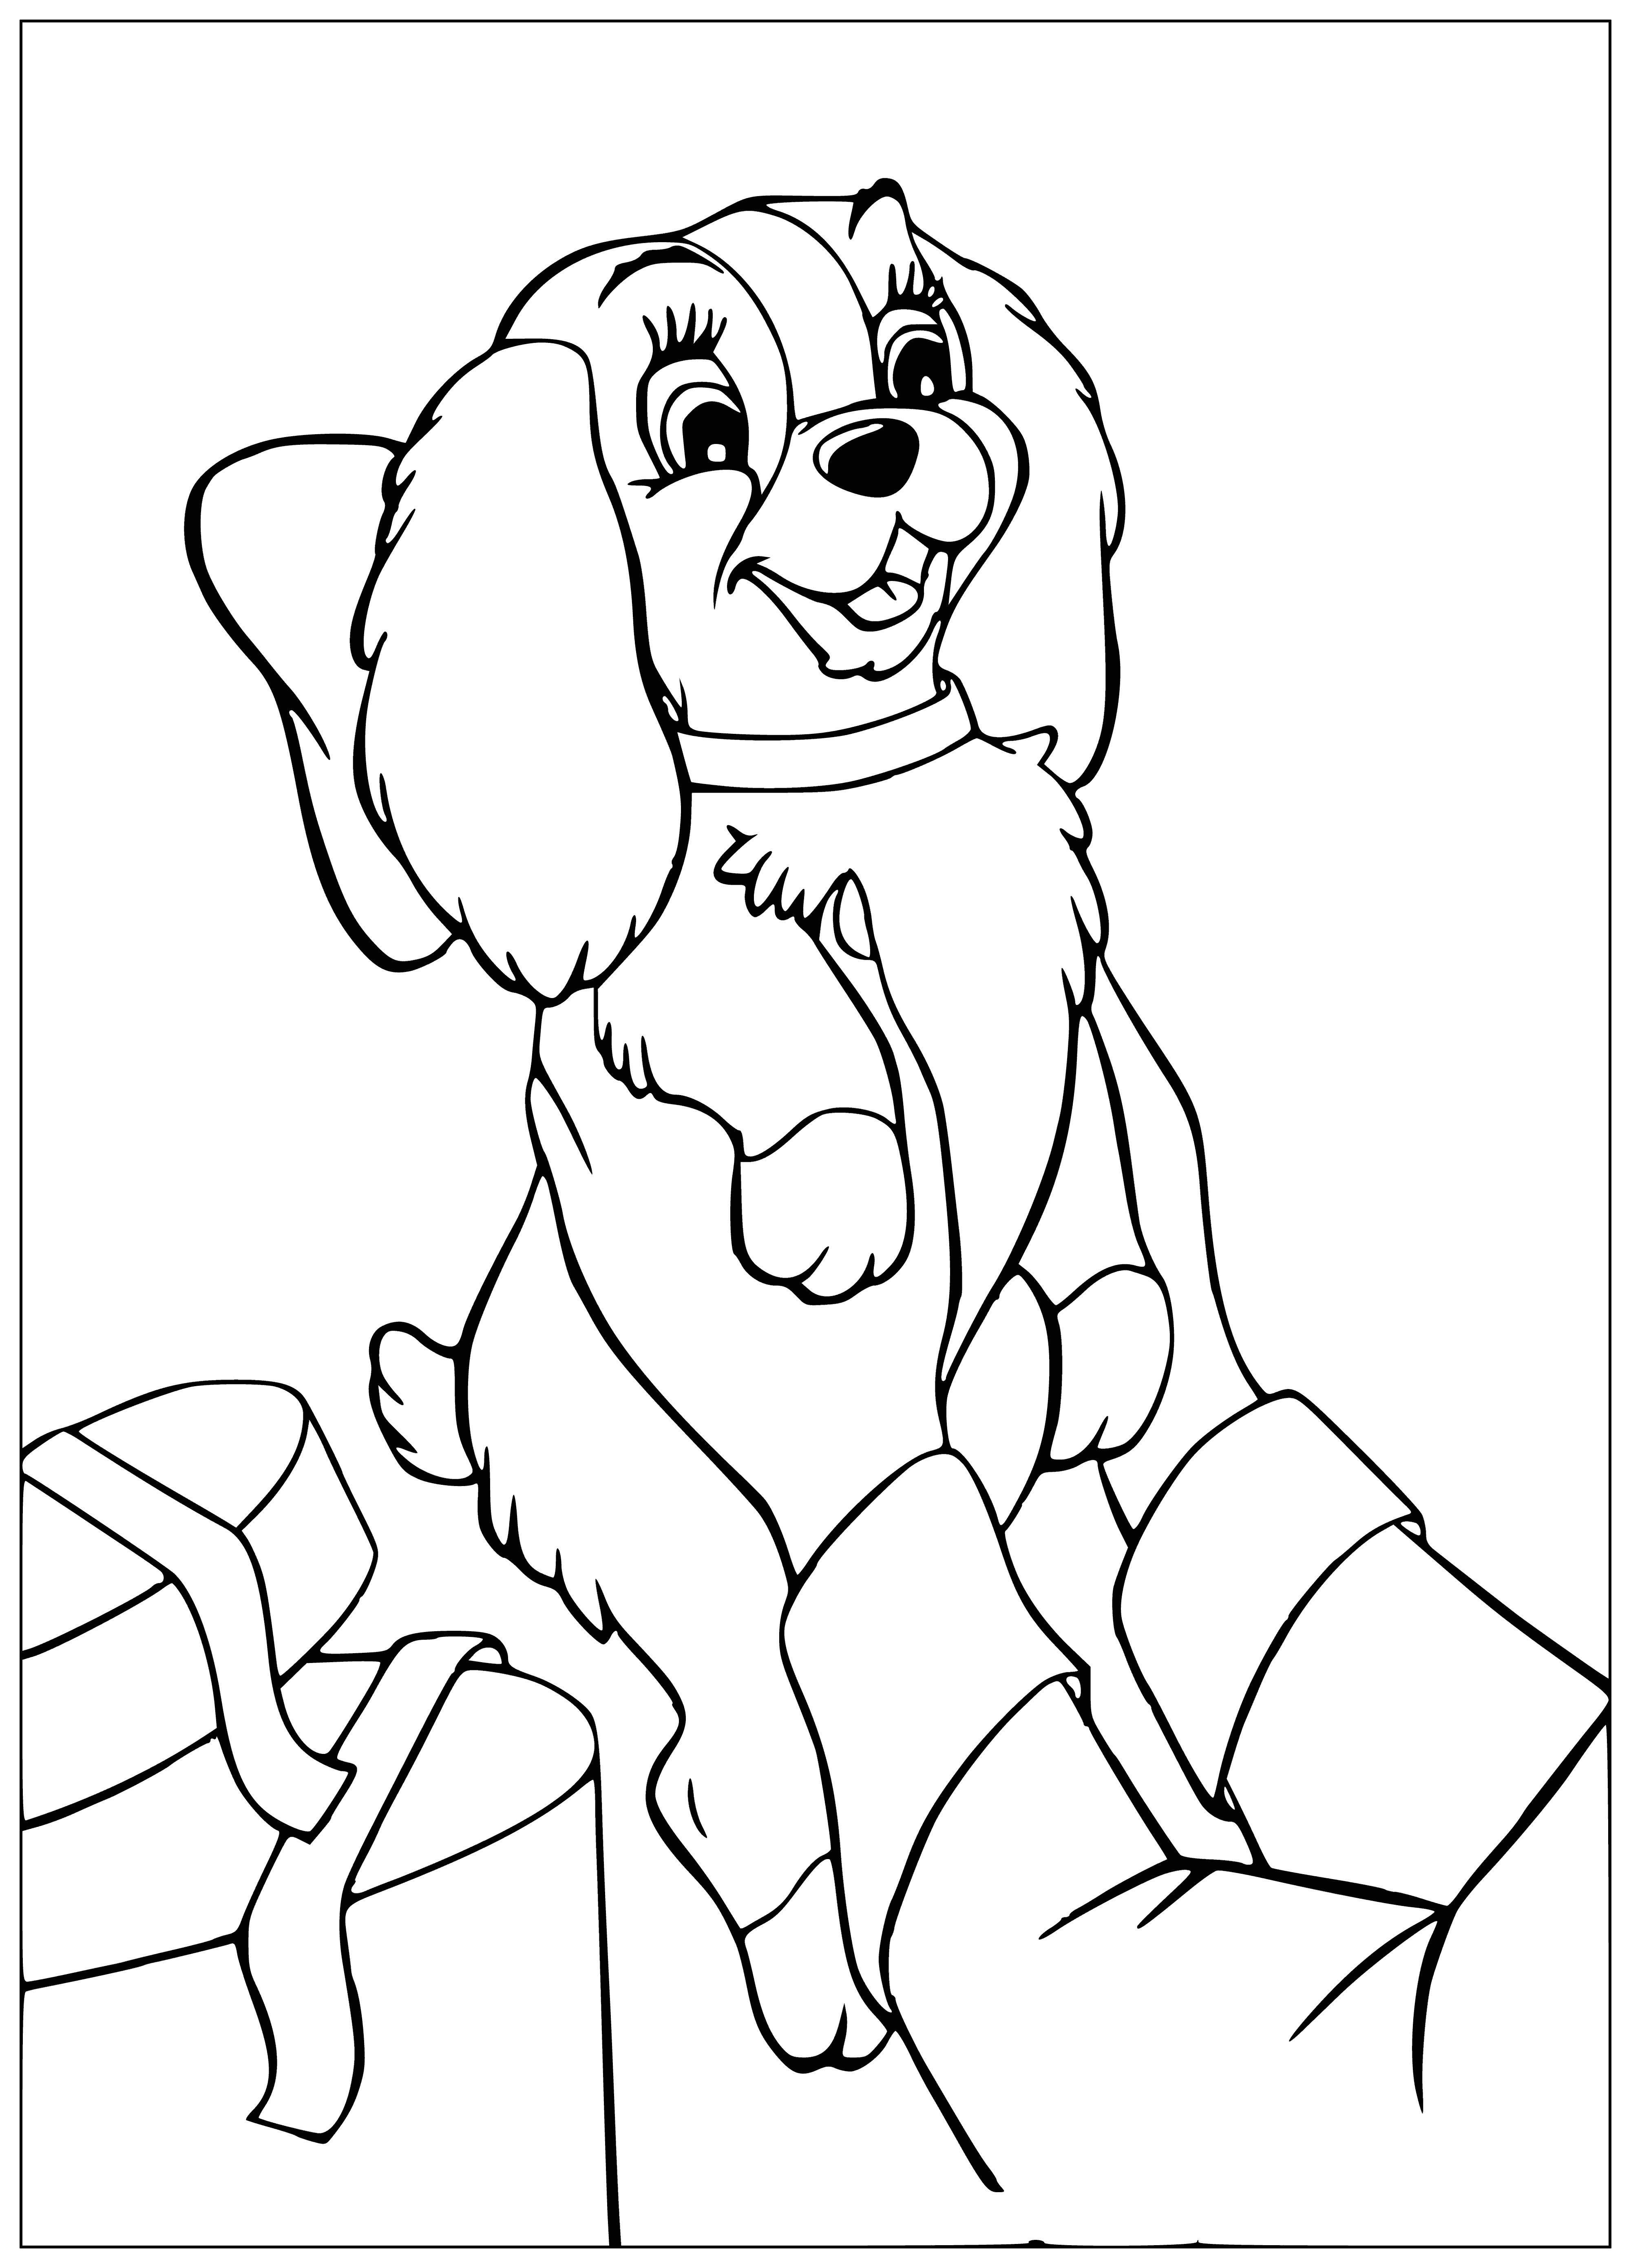 coloring page: Puppy "Buster" in red collar, with black spots & nose, sits in front of green plant with yellow flowers. #LadyAndTheTramp